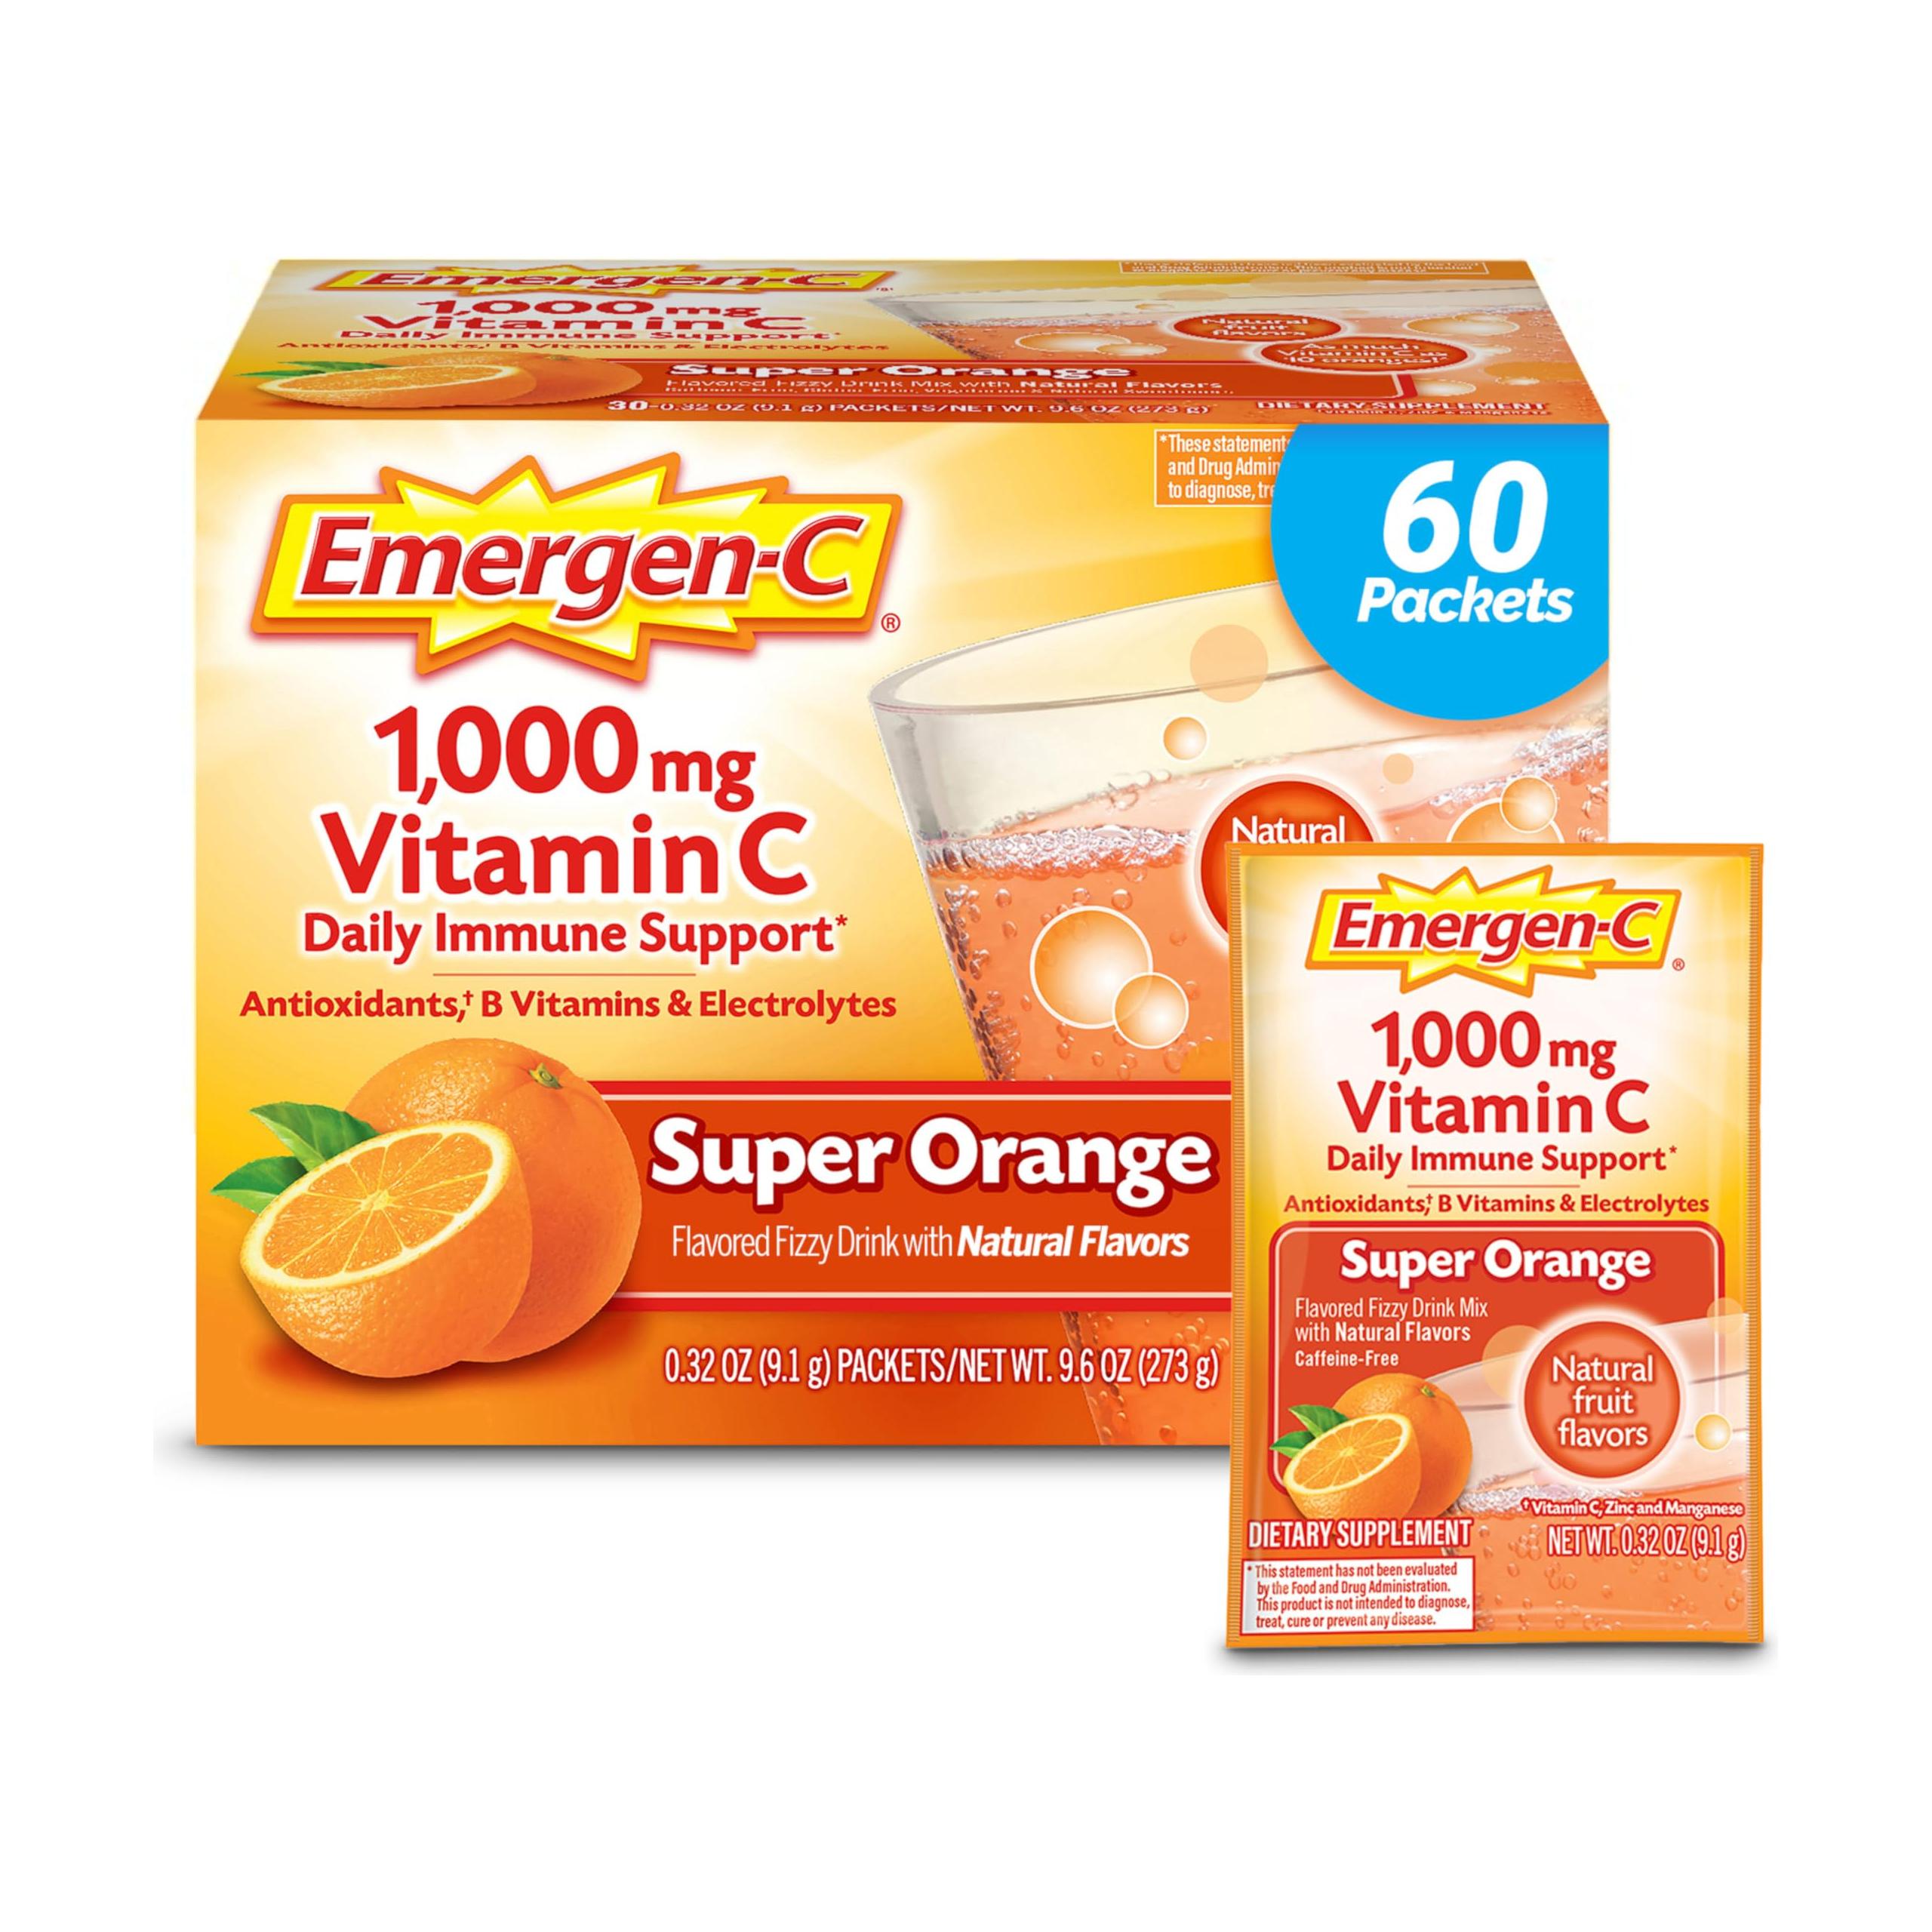 Emergen-C 1000mg Vitamin C Powder for Daily Immune Support Caffeine Free Vitamin C Supplements with Zinc and Manganese, B Vitamins and Electrolytes, Super Orange Flavor - 60 Count/2 Month Supply